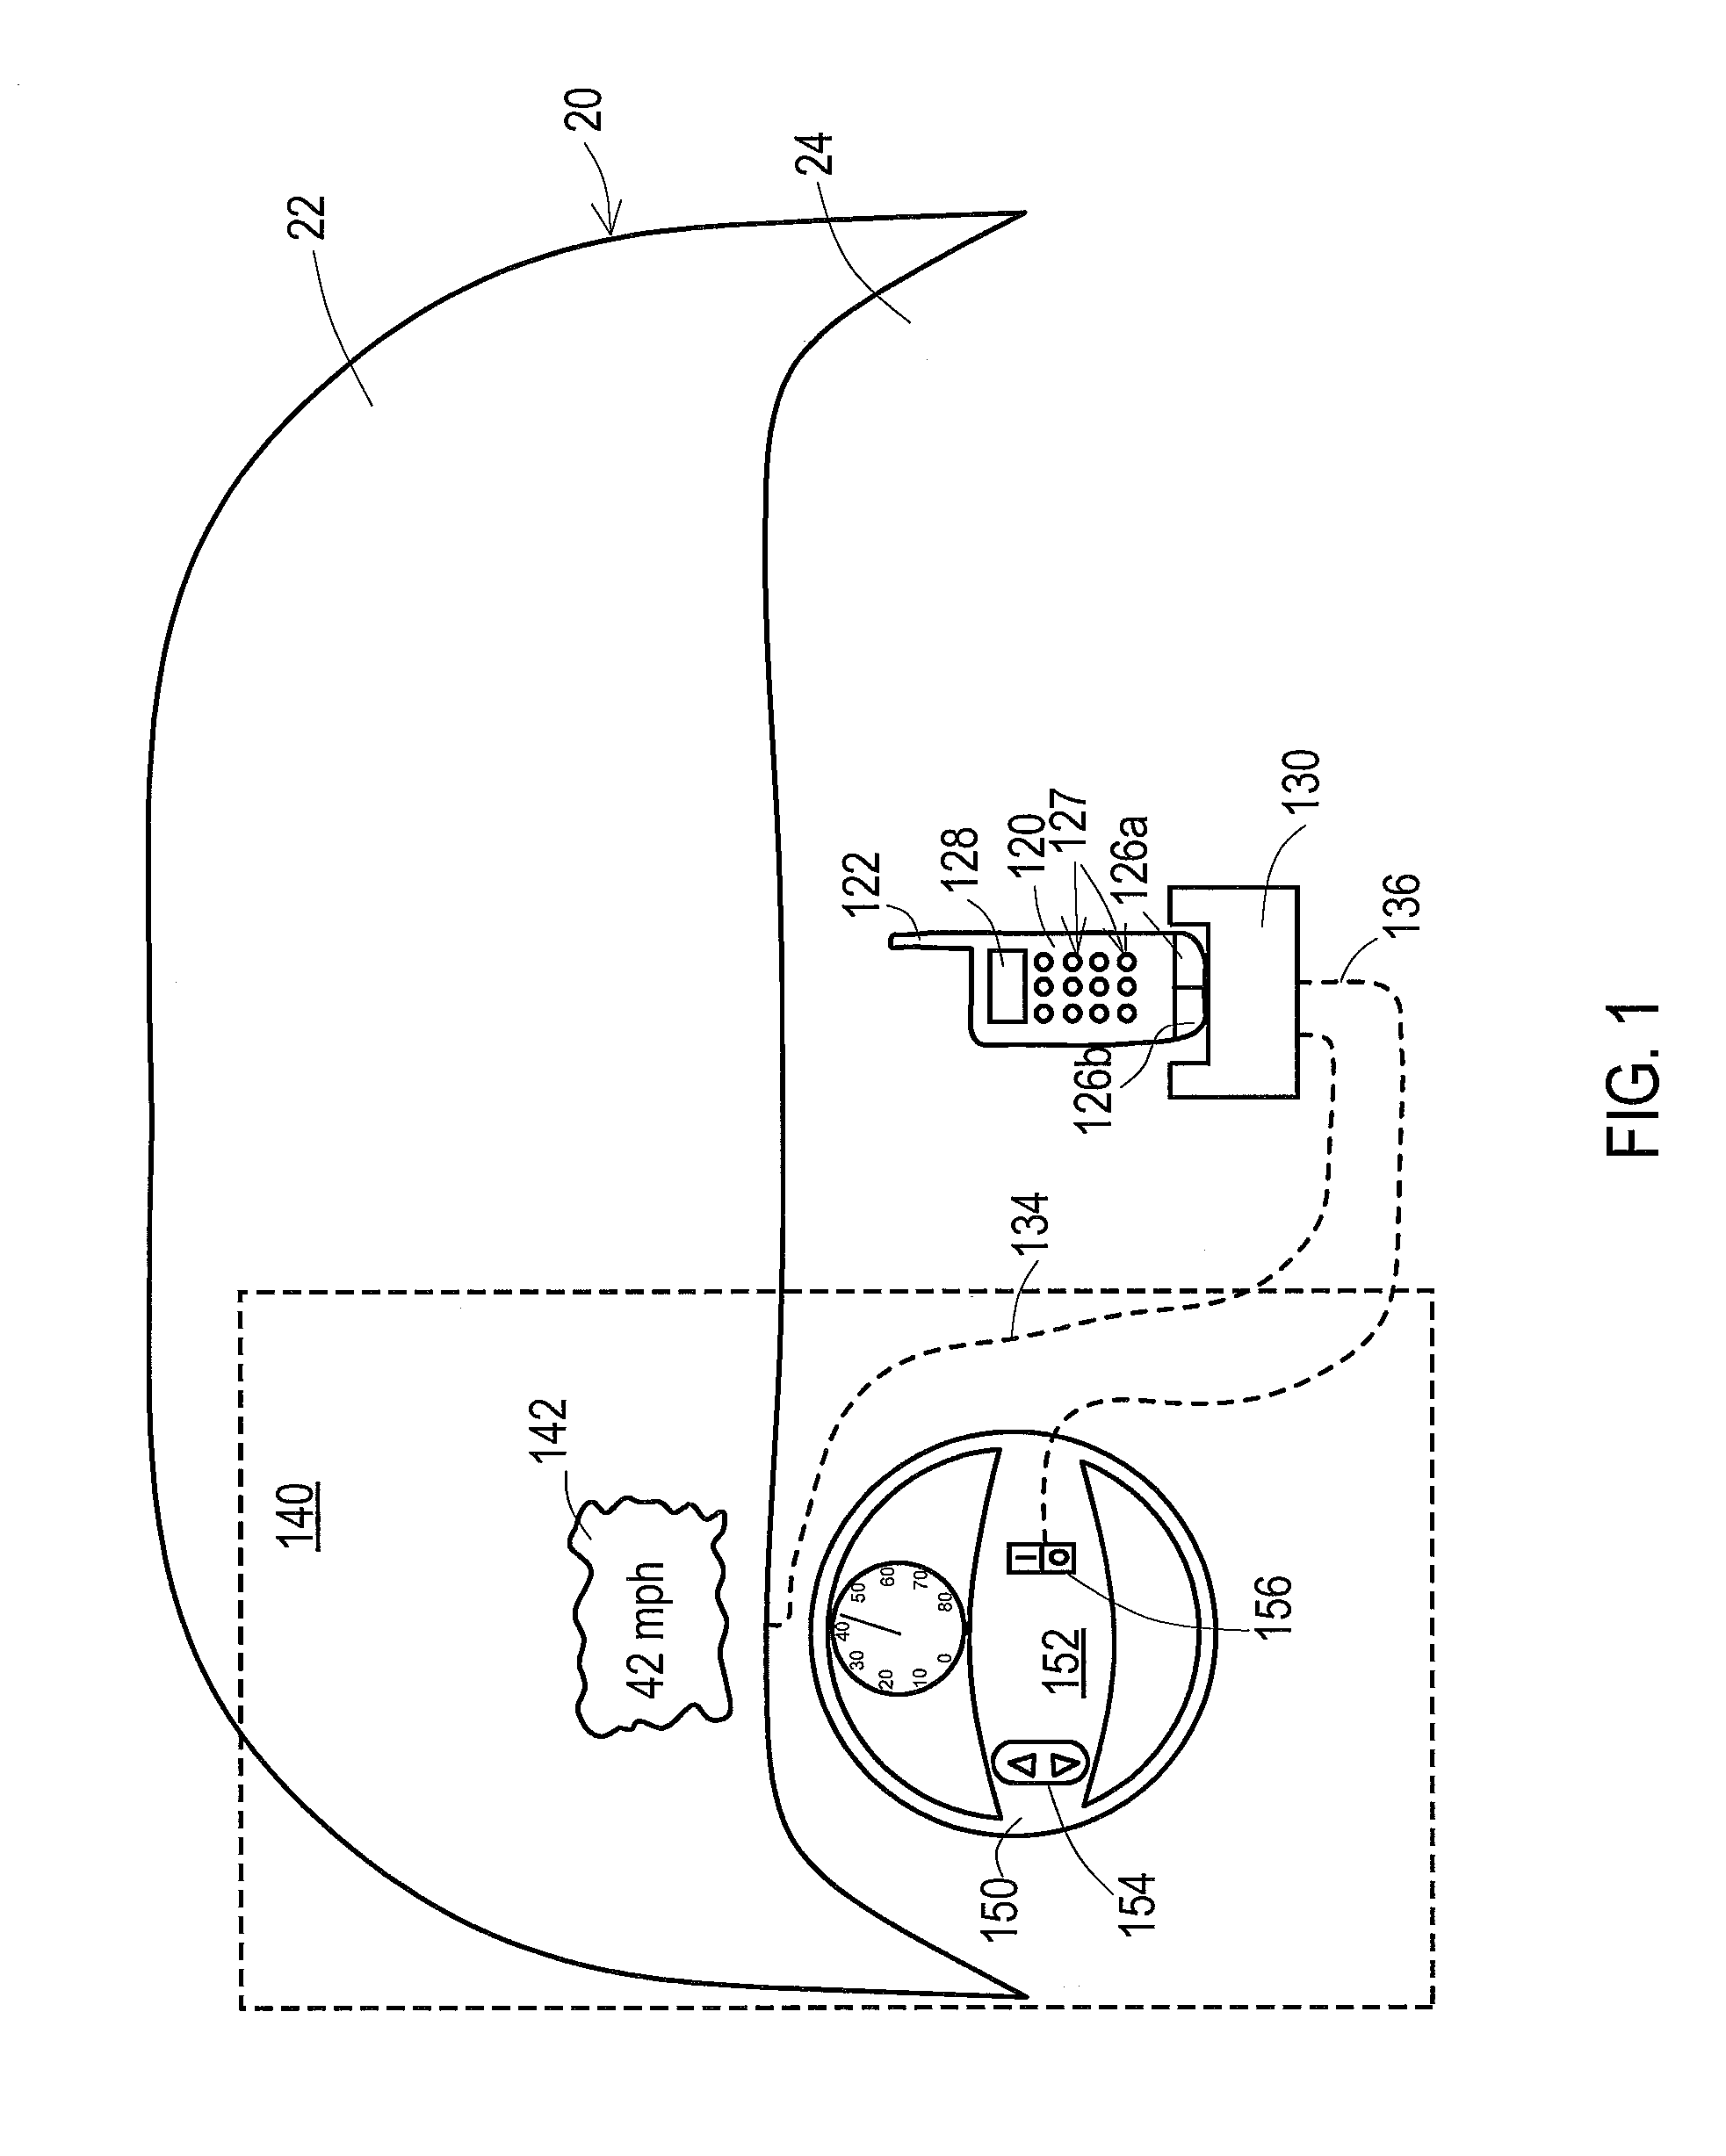 Portable communication device interface to a projection display